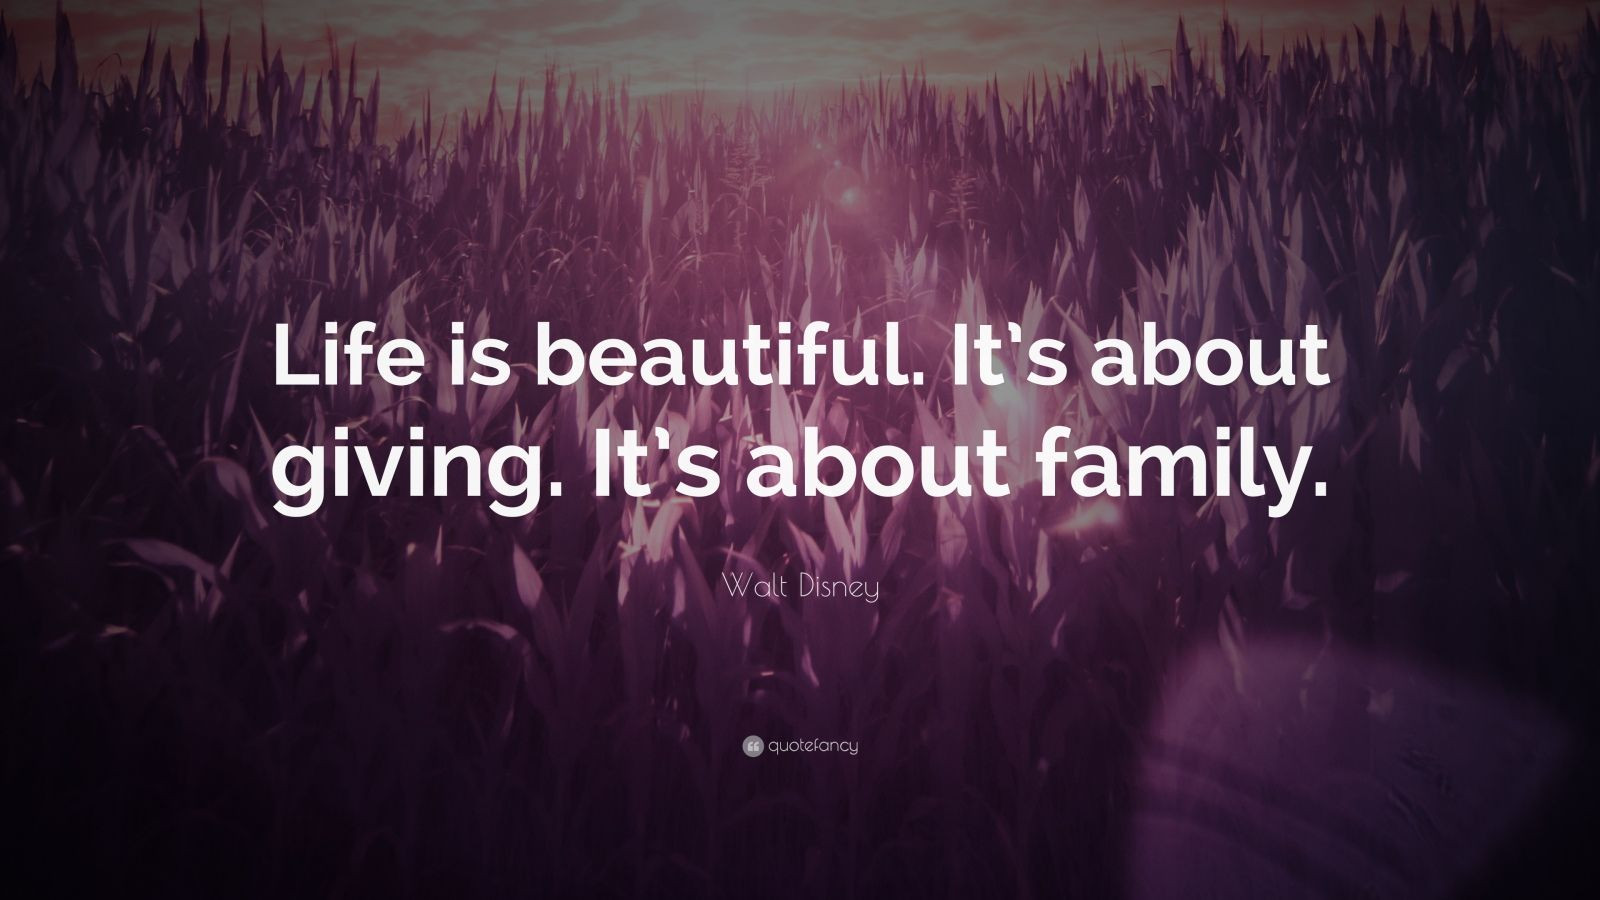 Walt Disney Quotes About Family
 Walt Disney Quote “Life is beautiful It’s about giving